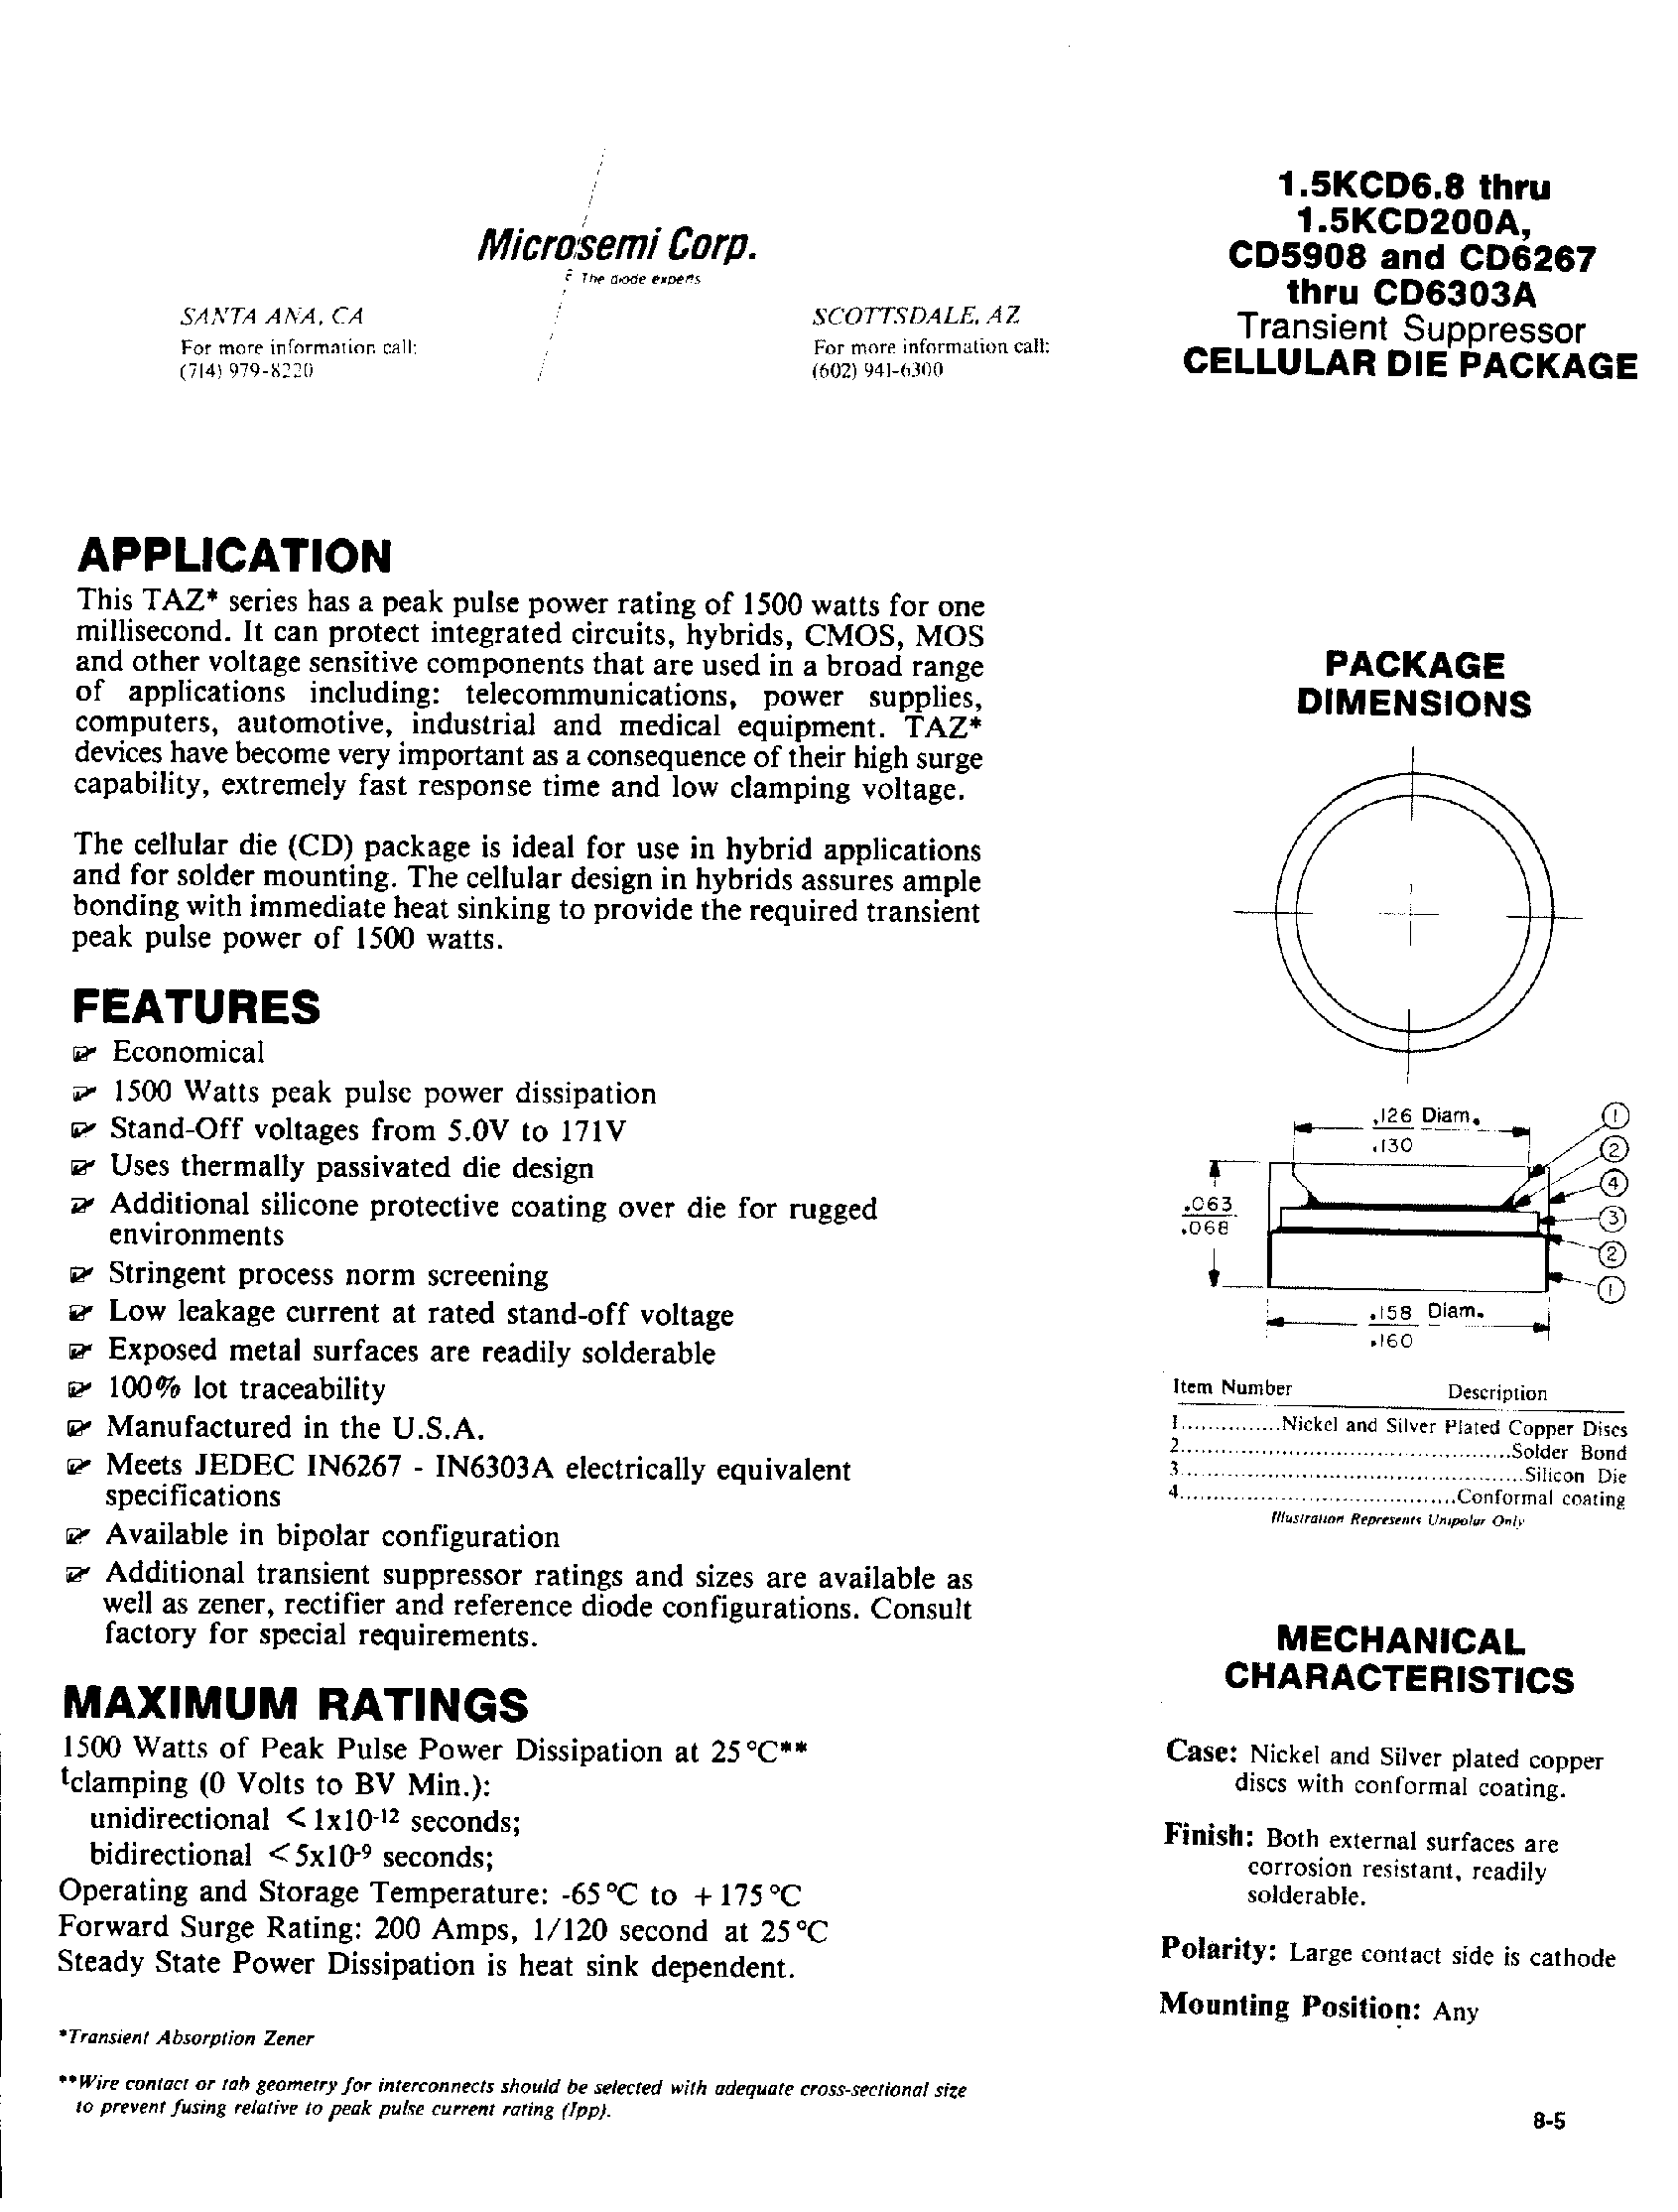 Datasheet CD6285A - Transient suppressor CELLULAR DIE PACKAGE page 1